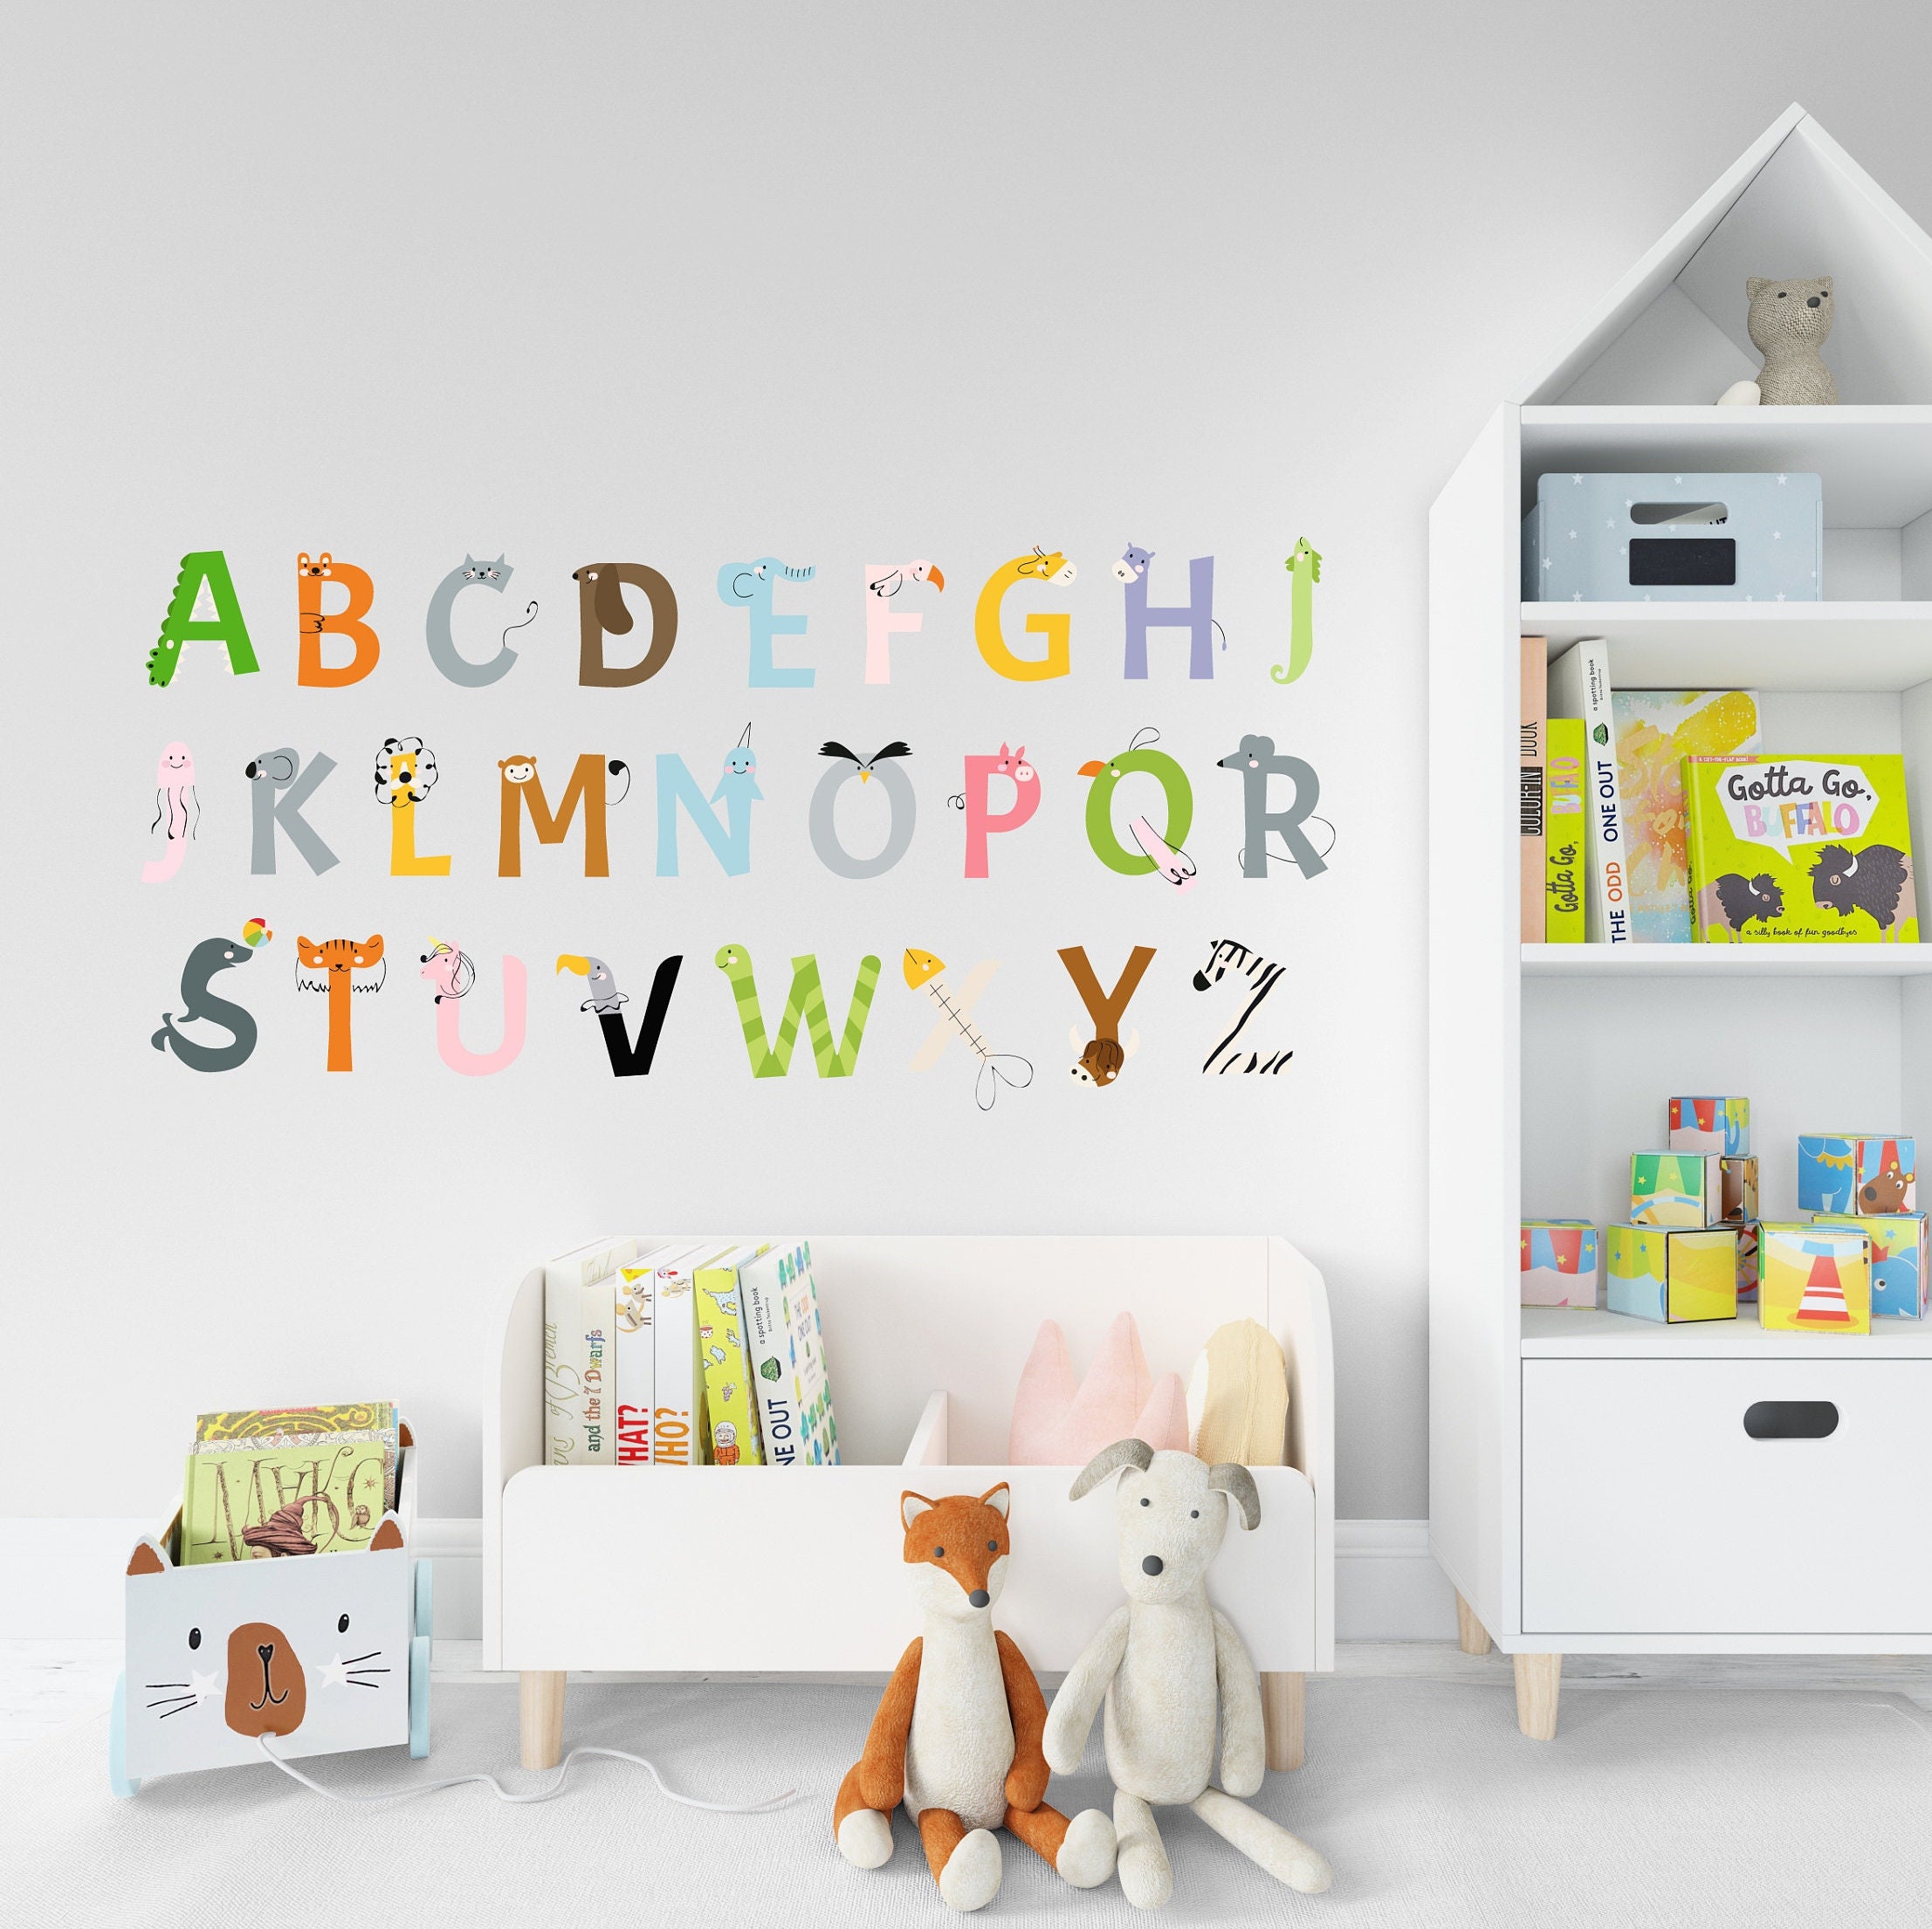 Rainbow Brights Alphabet Wall Decals, Abc's, Nursery Decor, ABC Wall  Stickers, Kids Room Wall Decals 